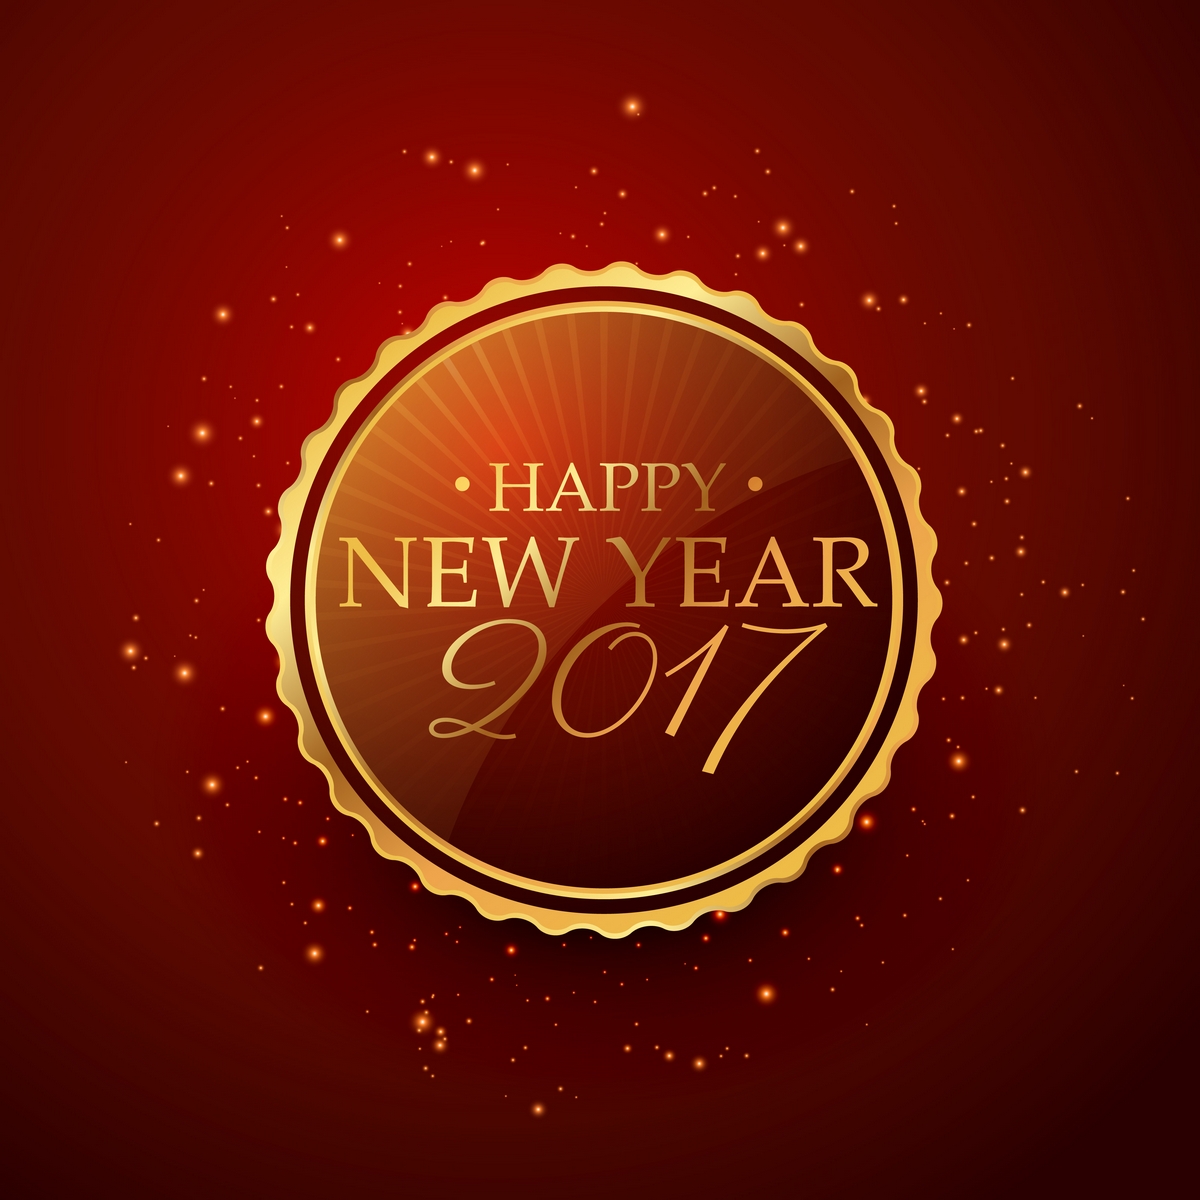 Top 100+ Happy New Year 2022 HD Wallpaper Download {Latest}*